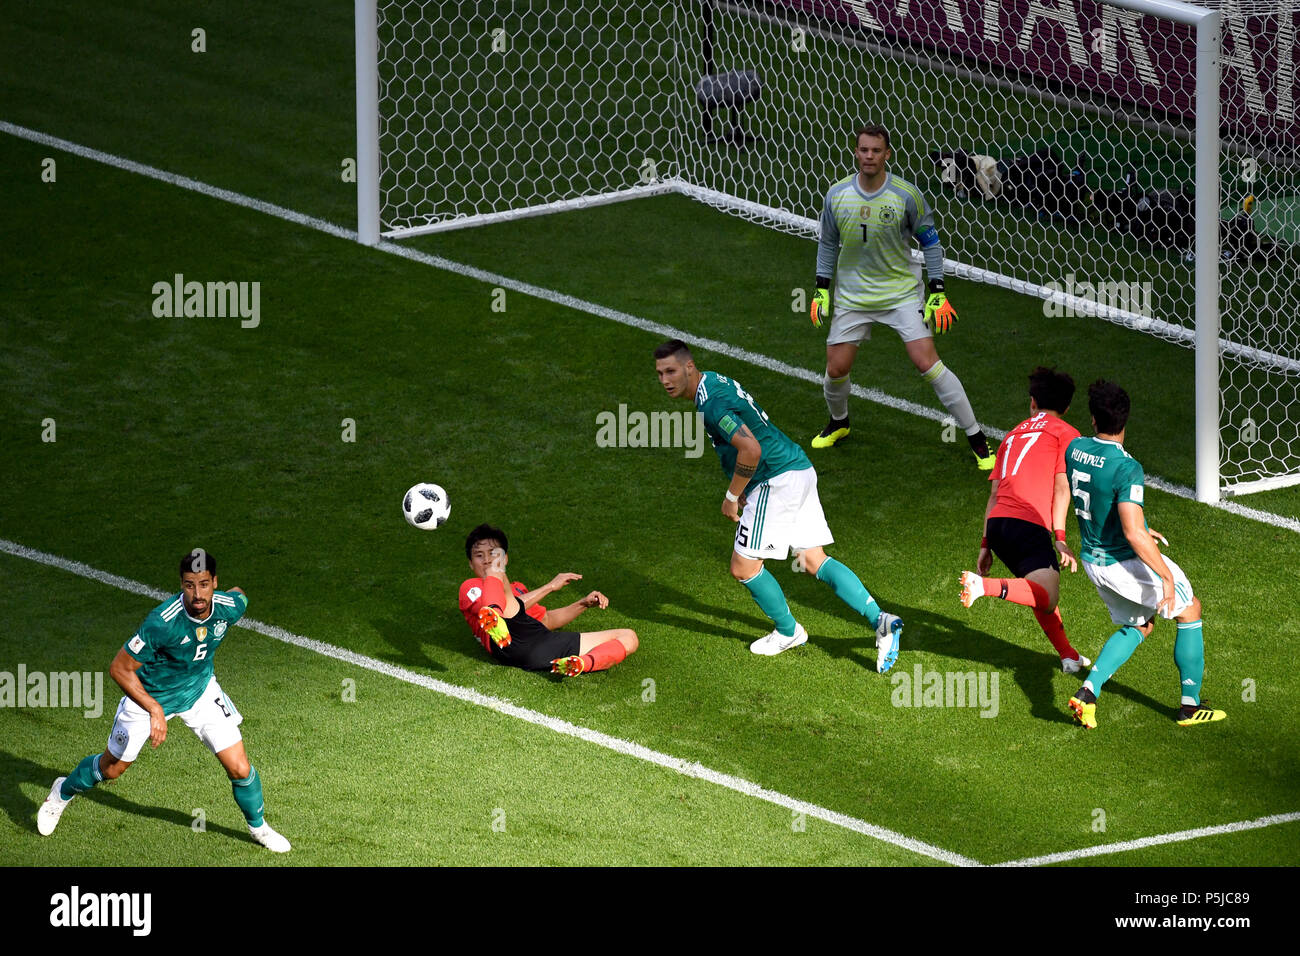 Kazan, Russia. 27th June, 2018. Soccer, FIFA World Cup, group F preliminary, Germany vs South Korea at the Kazan-Arena. Germany's keeper Manuel Neuer (top) is in the goal, watching Germany's Niklas Suele (c) defend. Credit: Ina Fassbender/dpa/Alamy Live News Stock Photo